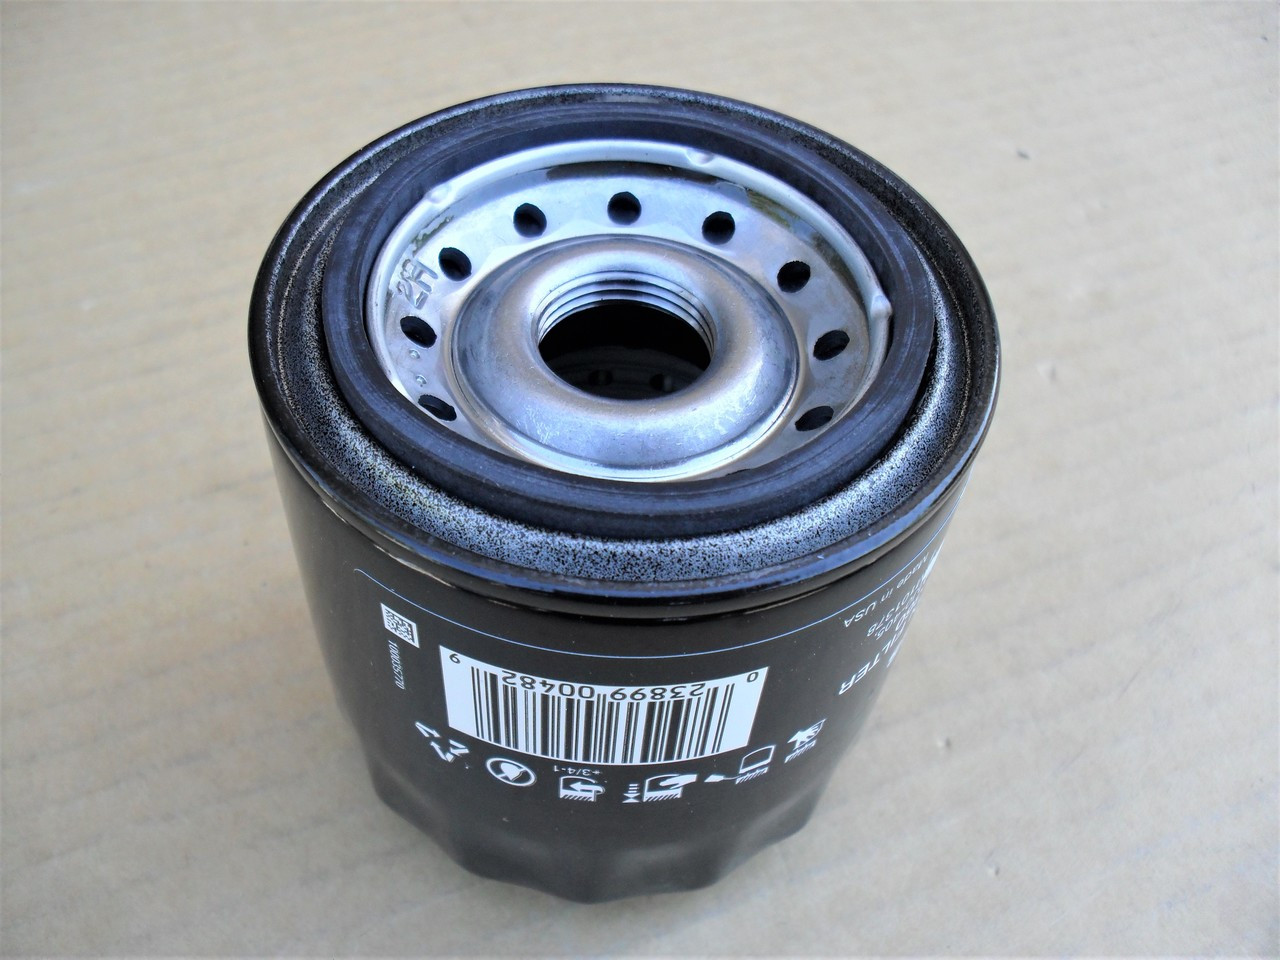 Oil Filter for Toro Workman, Reelmaster 1045167, 1083841, 1257025, 429030, 998384, 104-5167, 108-3841, 125-7025, 42-9030, 99-8384 Made In USA